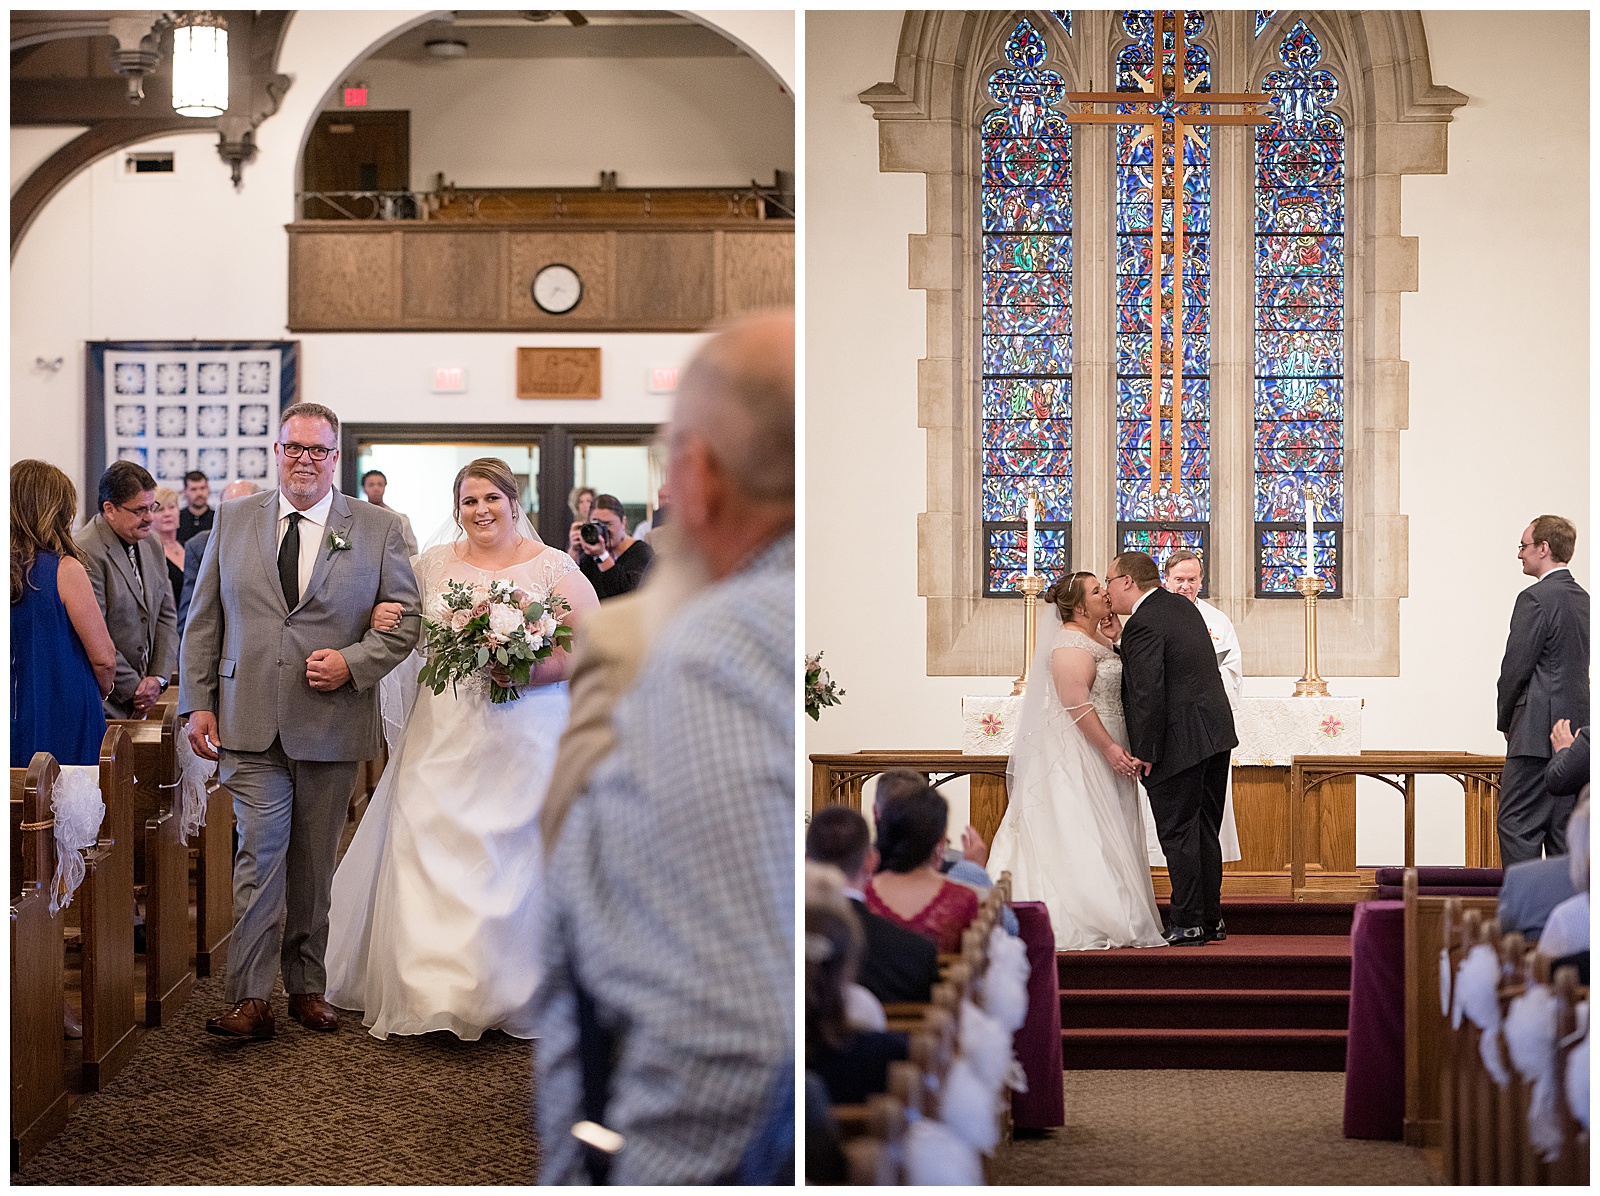 bride's father walking her down the aisle of her wedding day inside beautiful historic lutheran church